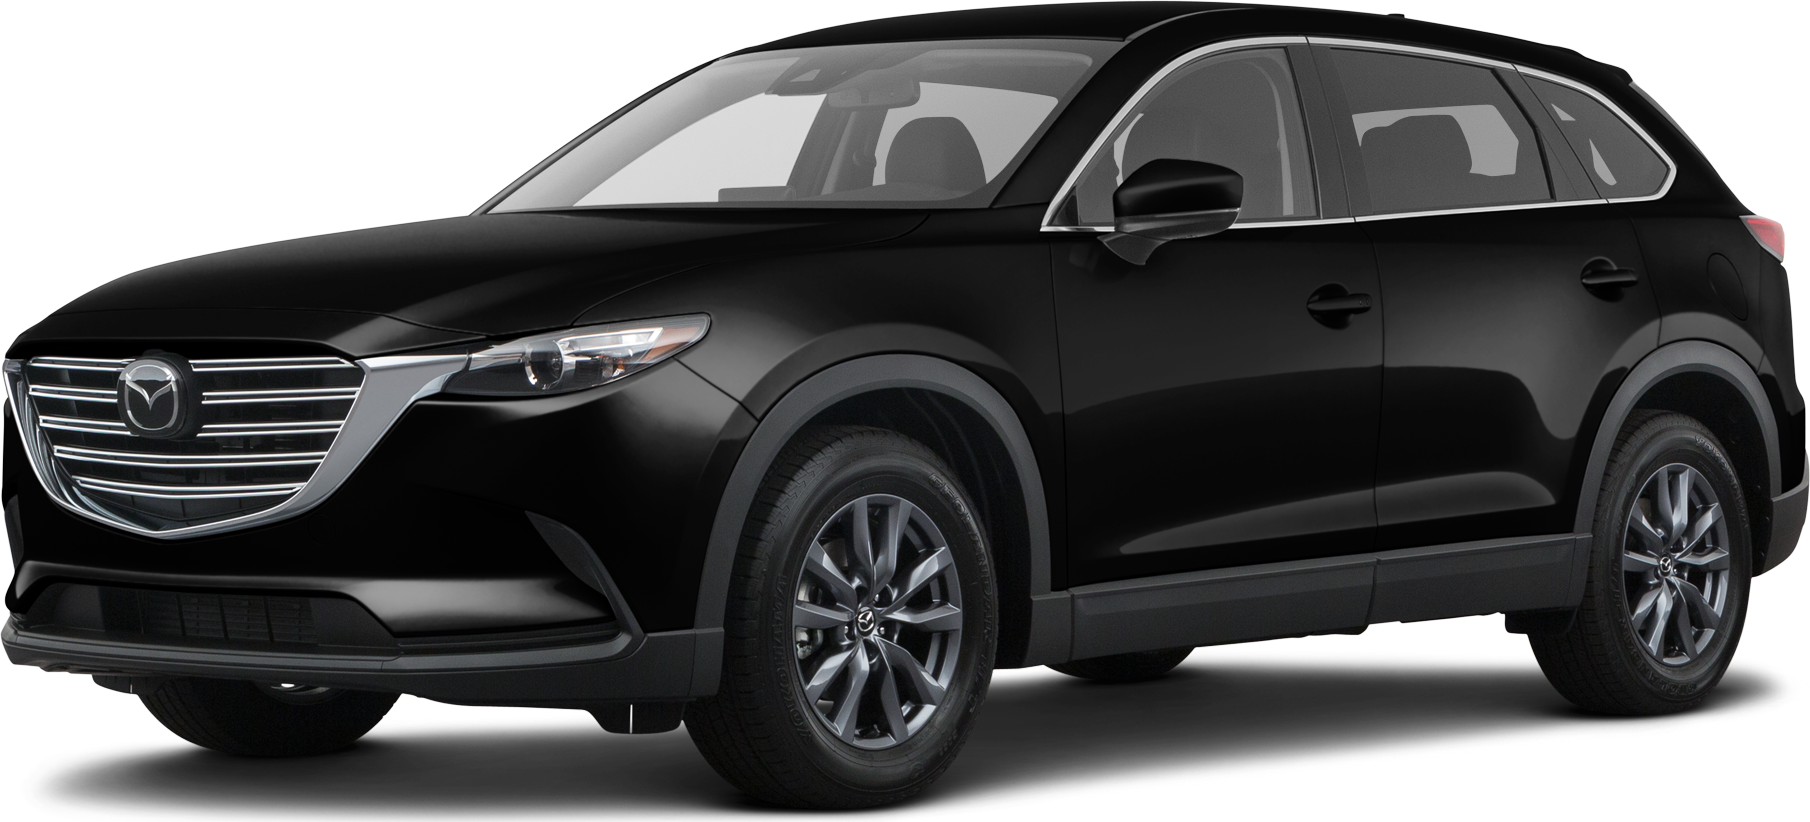 2021 Mazda Cx 9 Values And Cars For Sale Kelley Blue Book